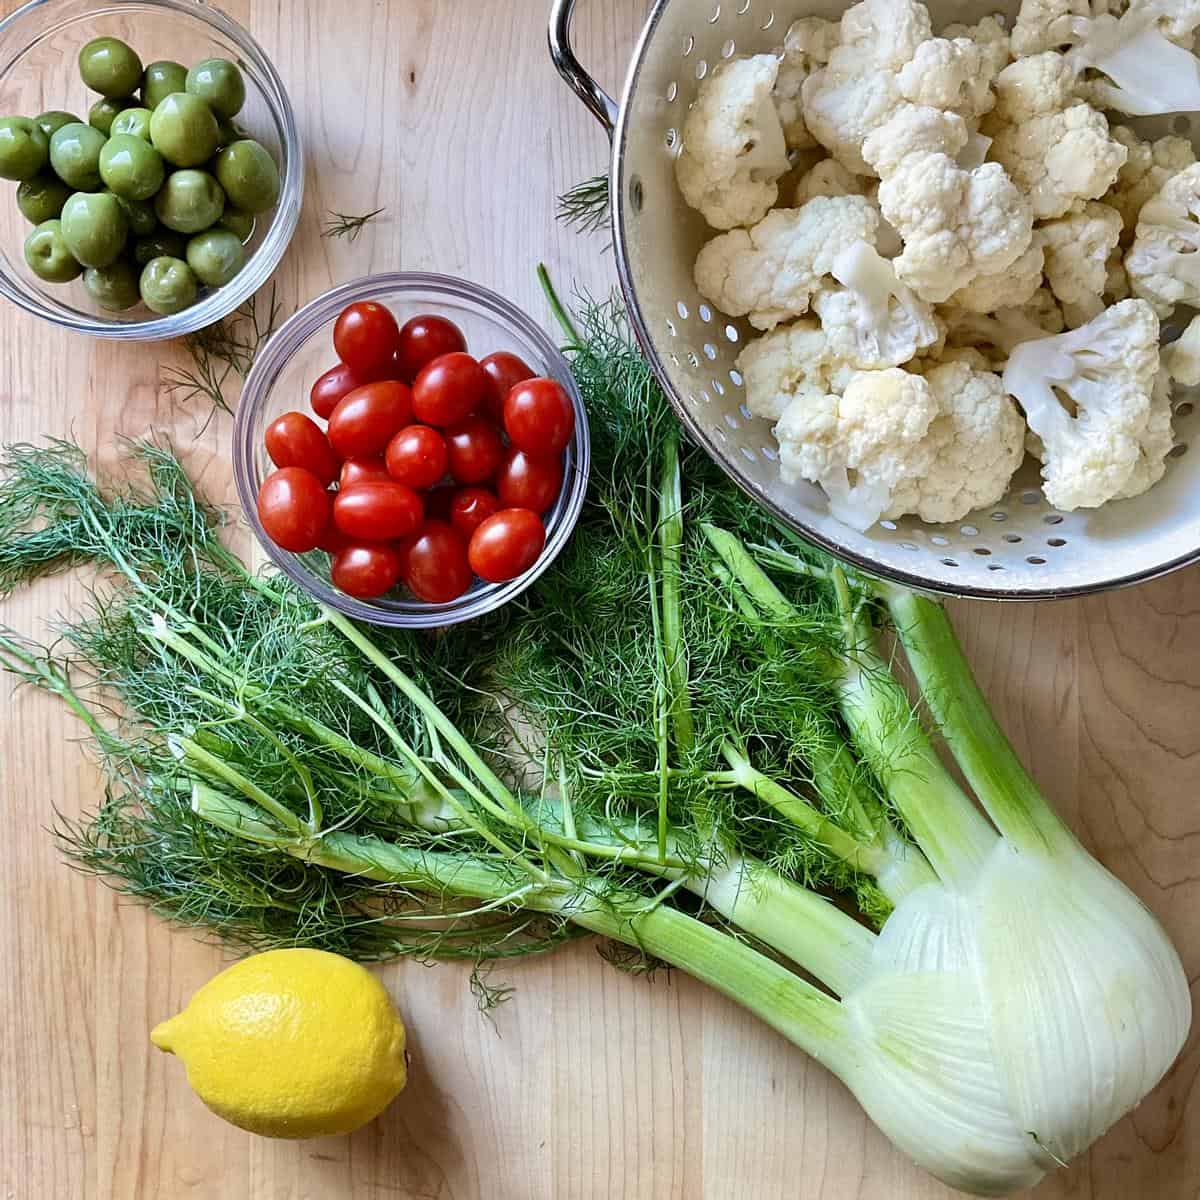 The ingredients to make a cauliflower salad are on a wooden cutting board.